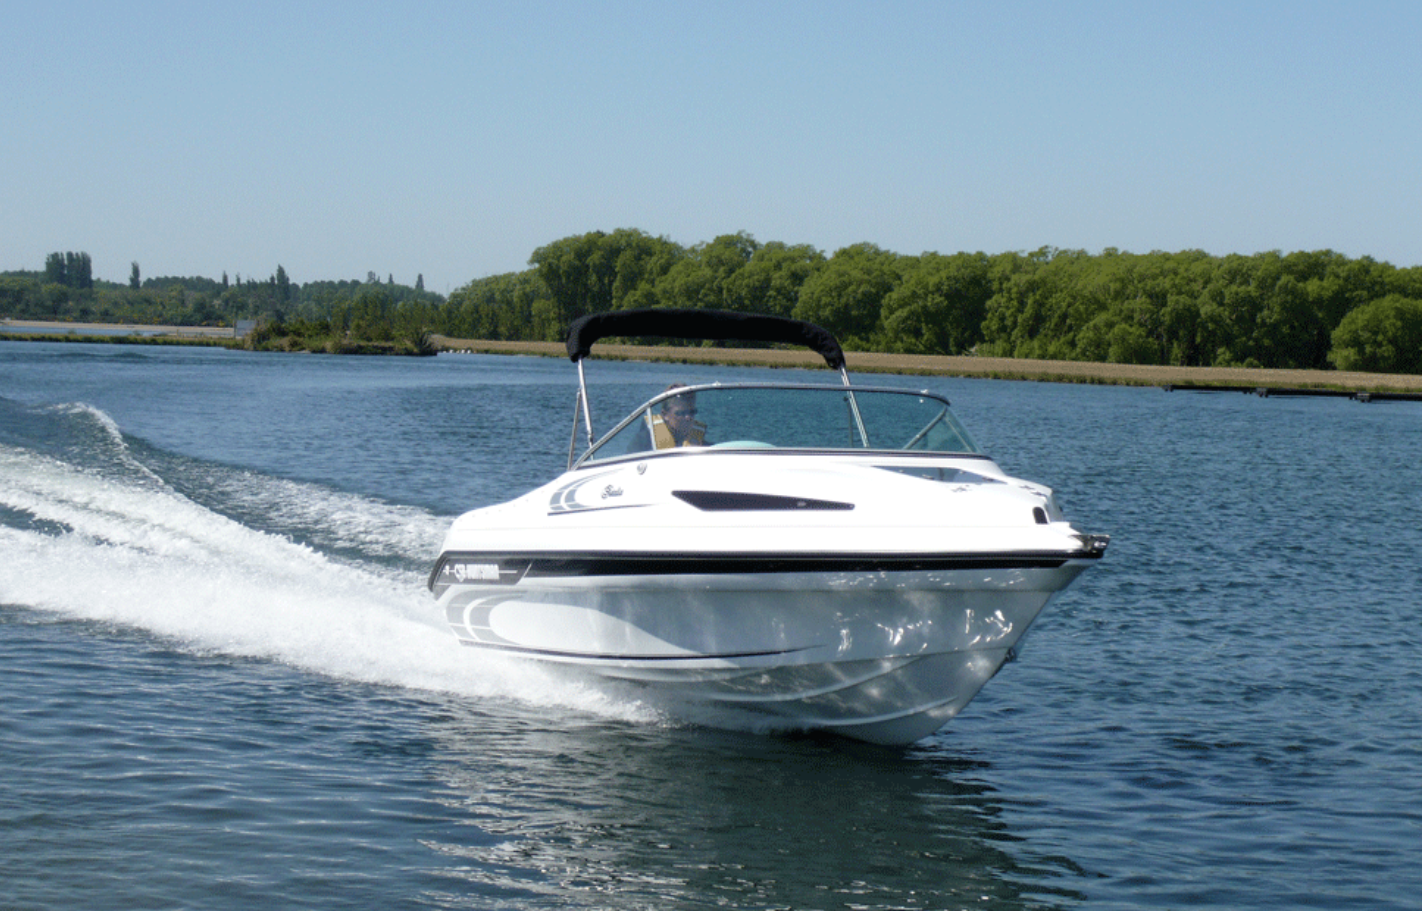 Boating basics, New Boaters, Boating for Beginners, Boating Tips, Safety